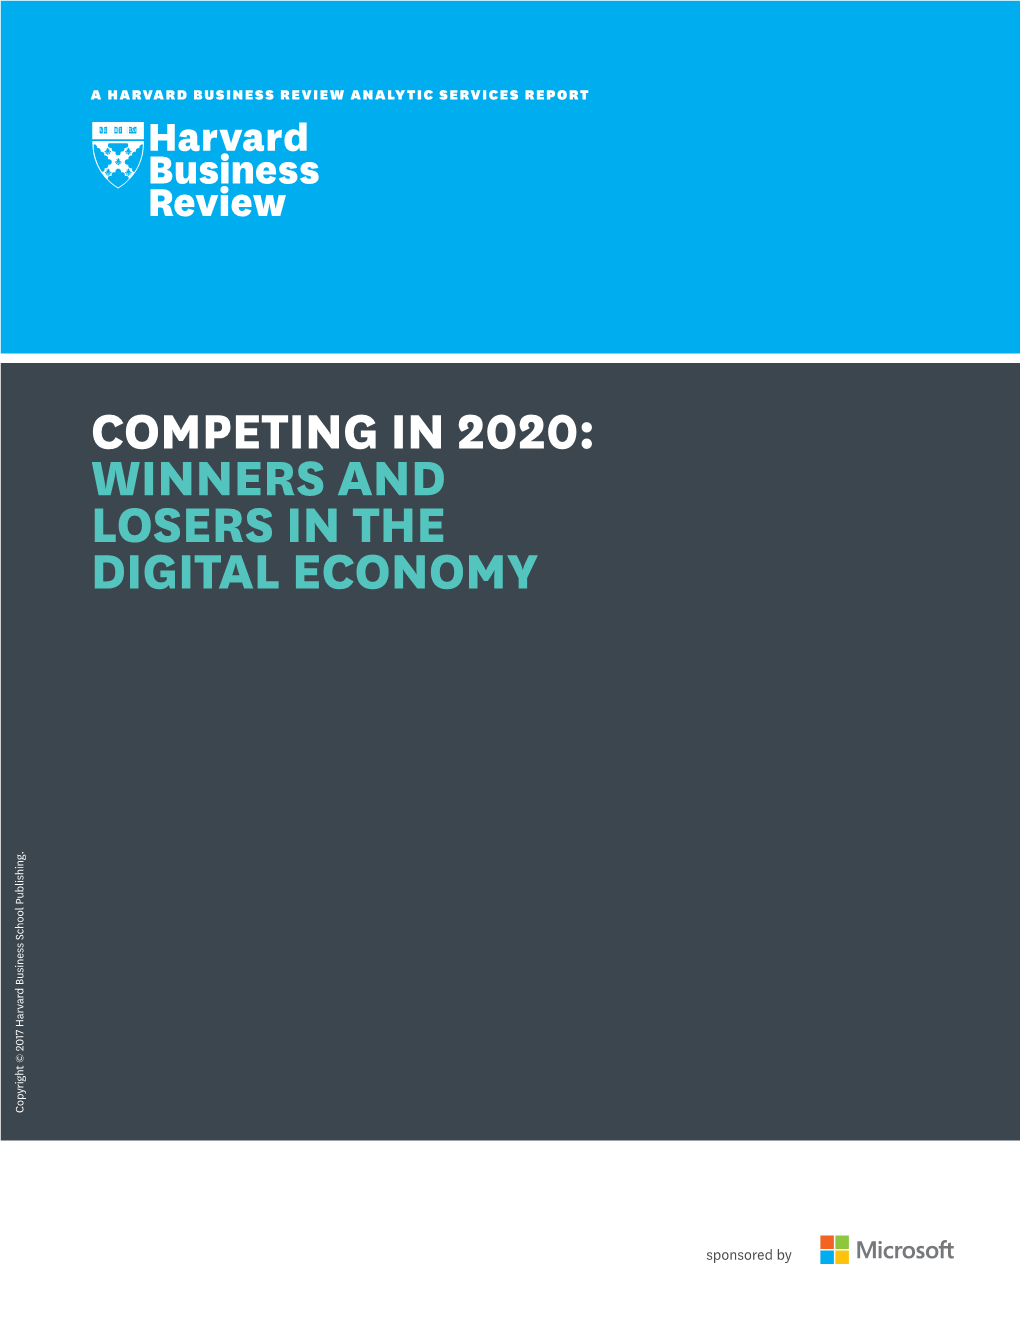 Winners and Losers in the Digital Economy